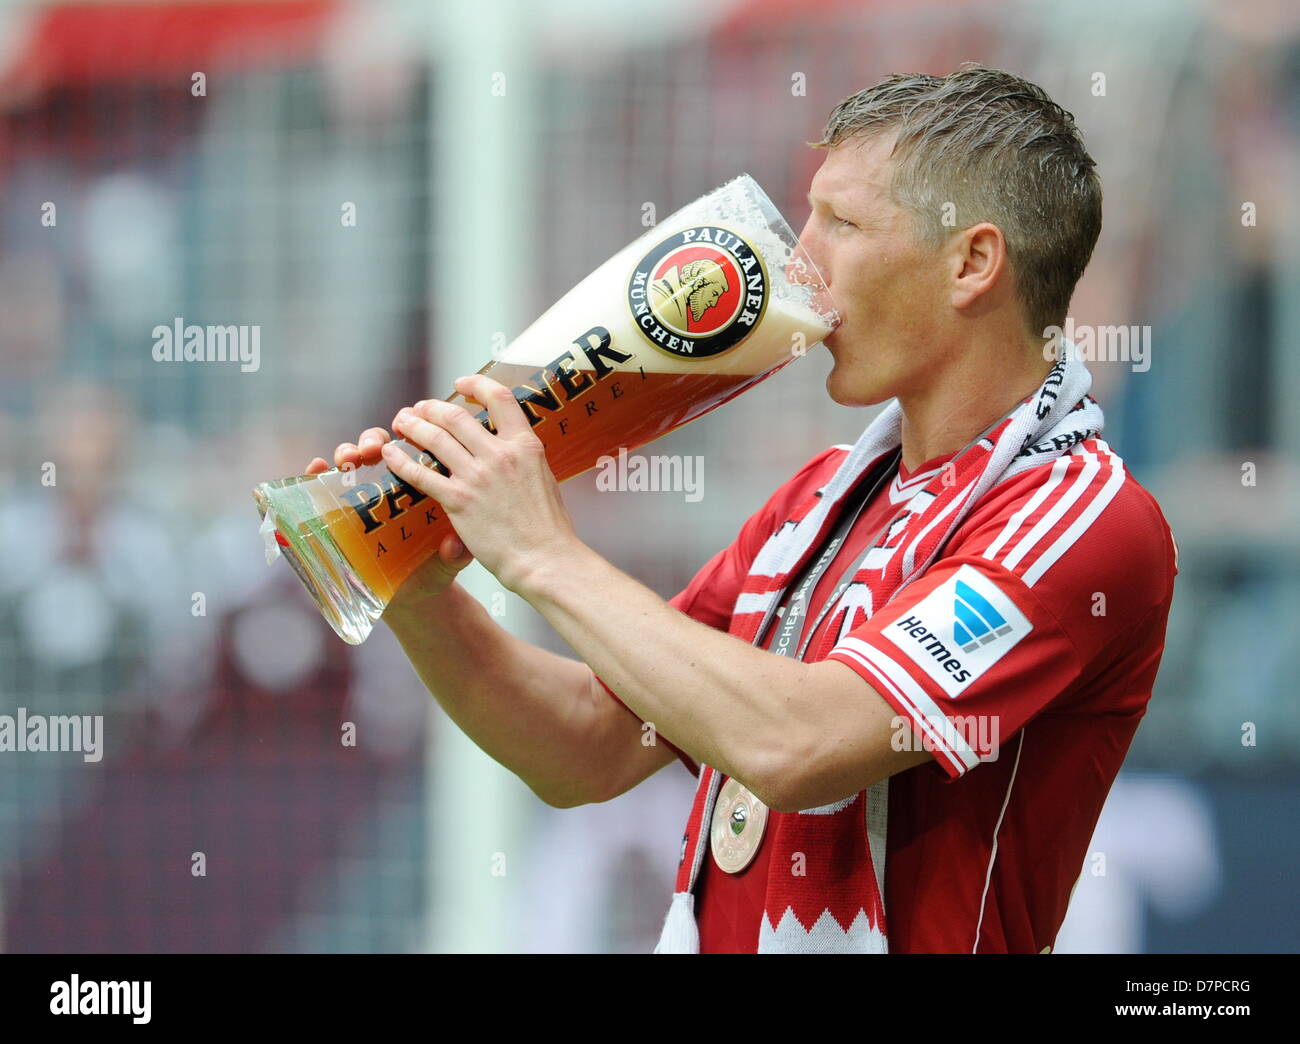 Bayern Munich's Bastian Schweinsteiger drinks from an extra-large wheat beer  glass after the Bundesliga soccer match between Bayern Munich and FC  Augsburg at Allianz Arena in Munich, Germany, 11 May 2013. Photo: